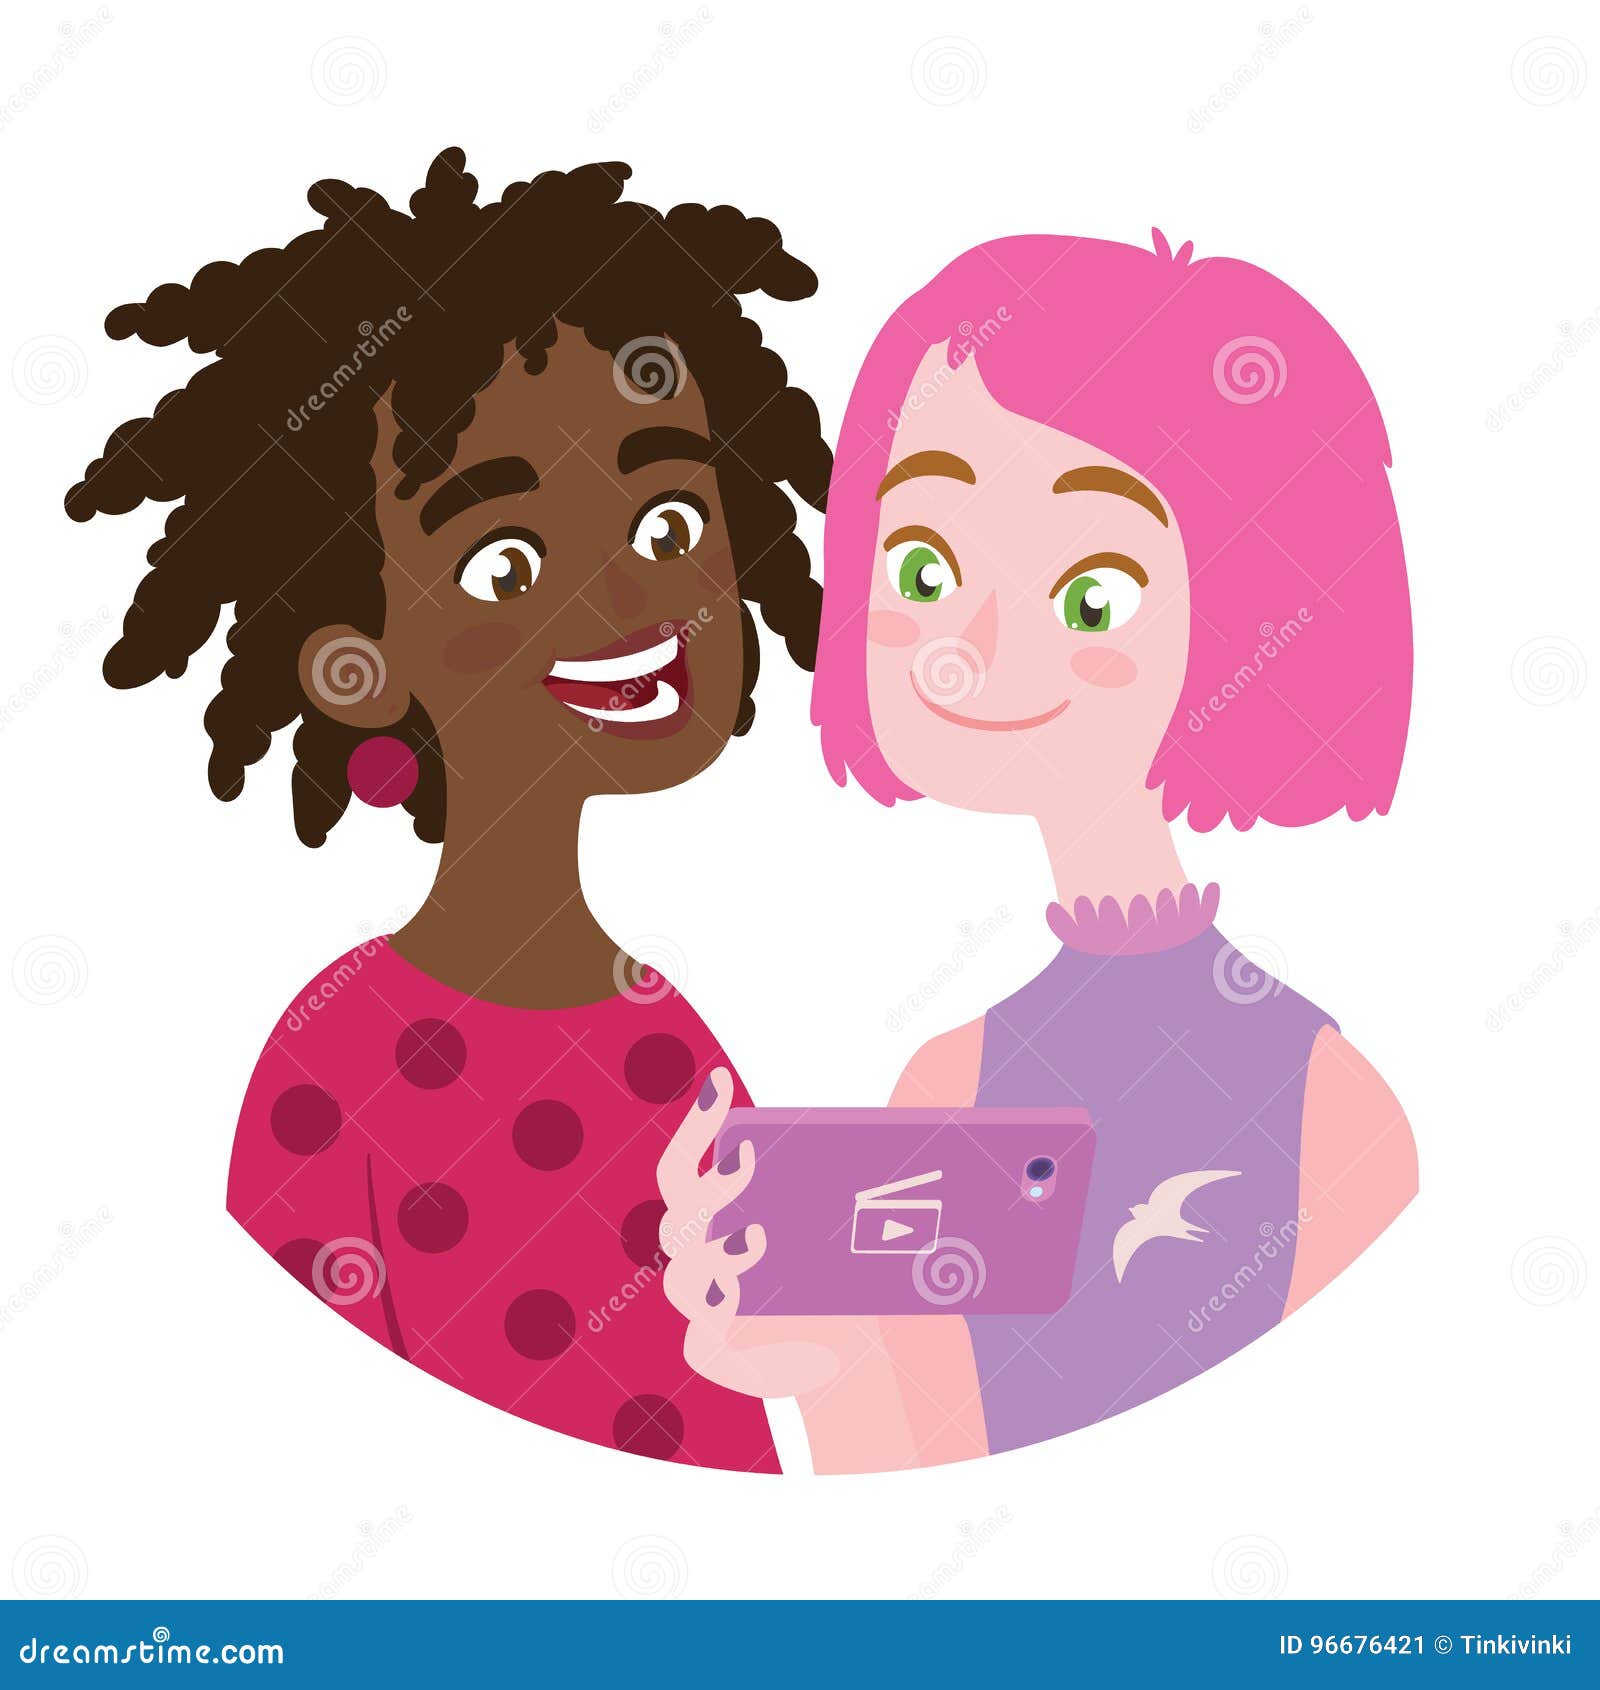 Friend is Sharing Video To a Friend. Vector Illustration of Friendship in  Flat Cartoon Style. Stock Vector - Illustration of media, film: 96676421